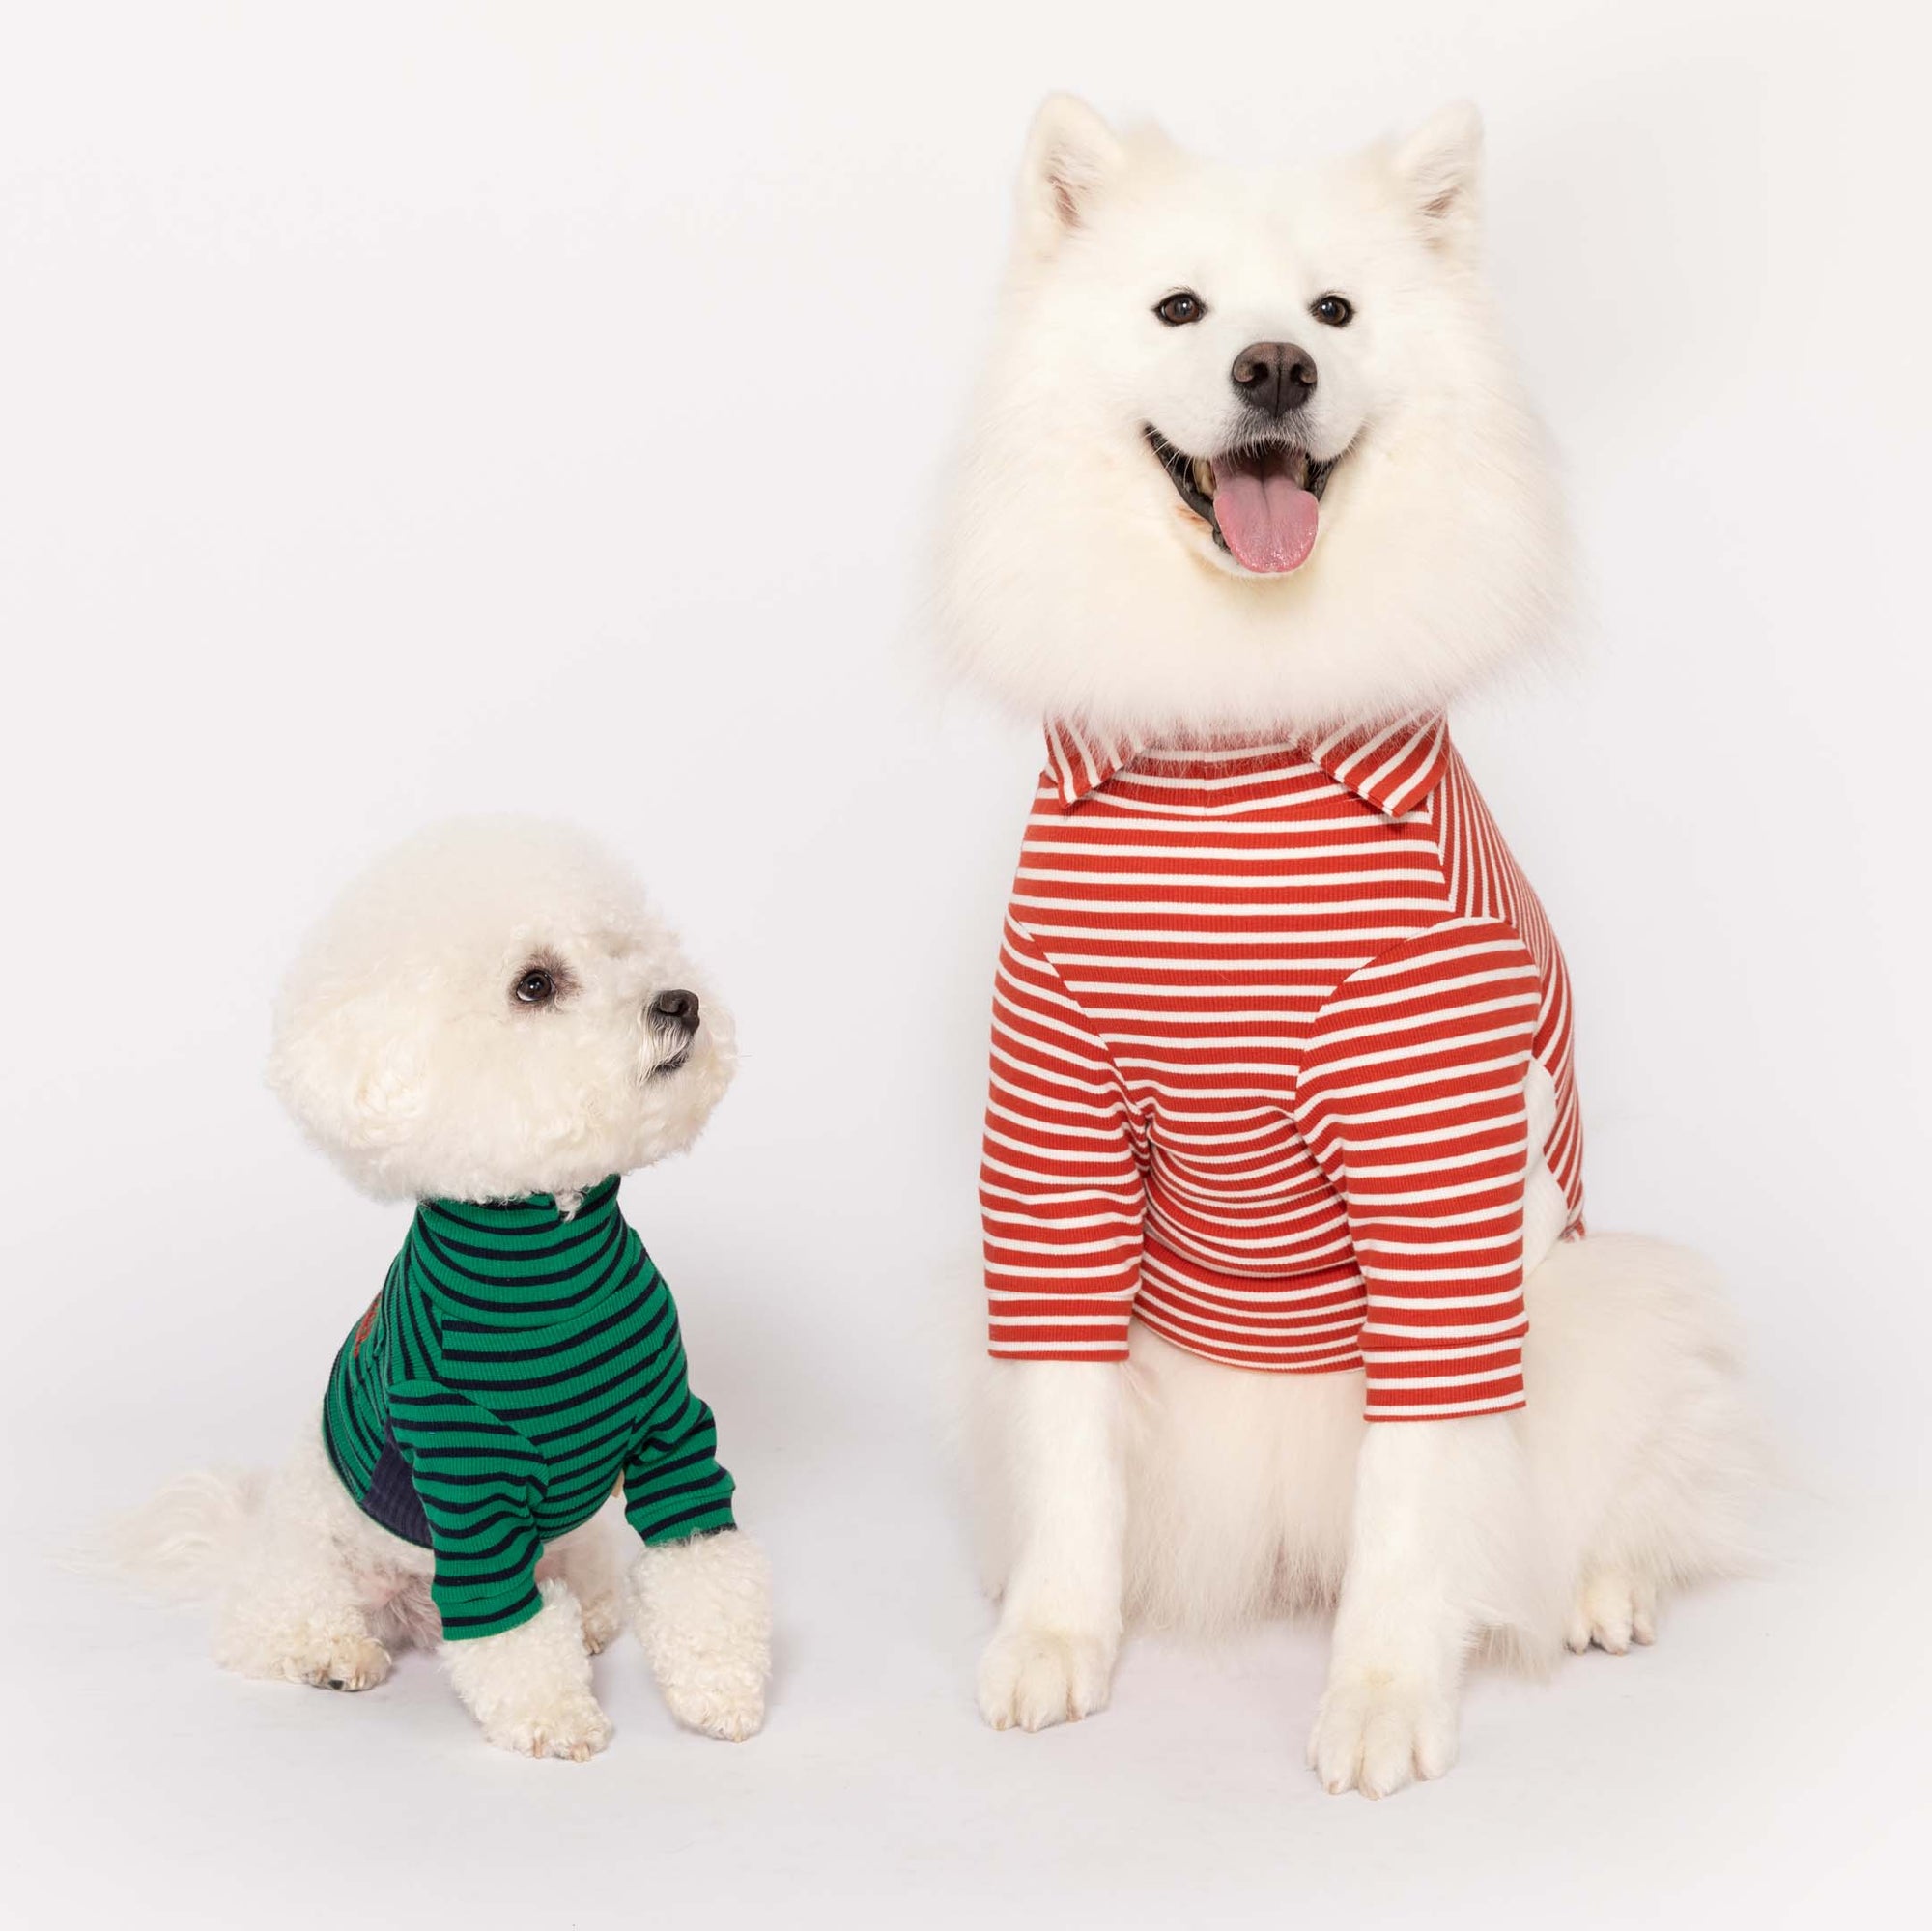  Happy Samoyed and Bichon Frise wearing trendy striped shirts in Rust & Ivory , posing together with joy.